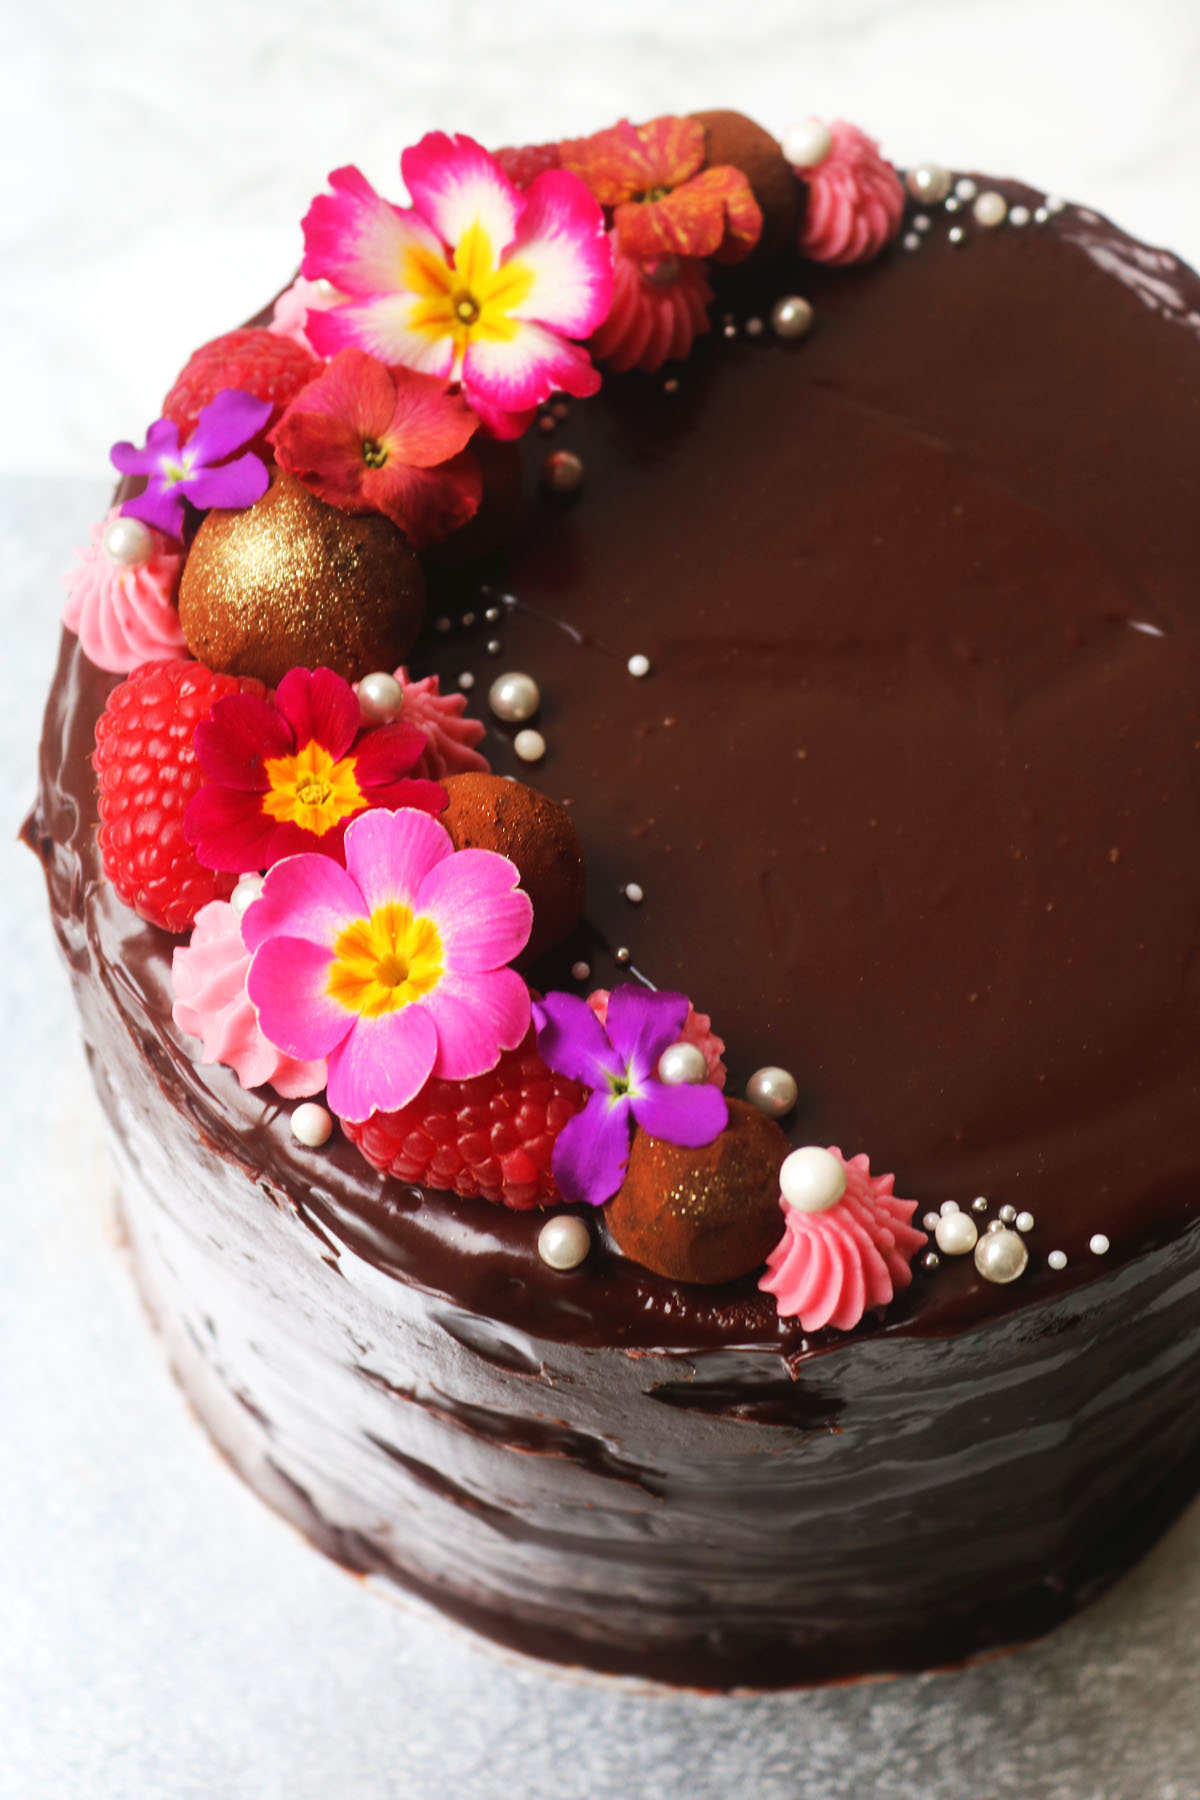 Do you use edible flowers to decorate cakes?